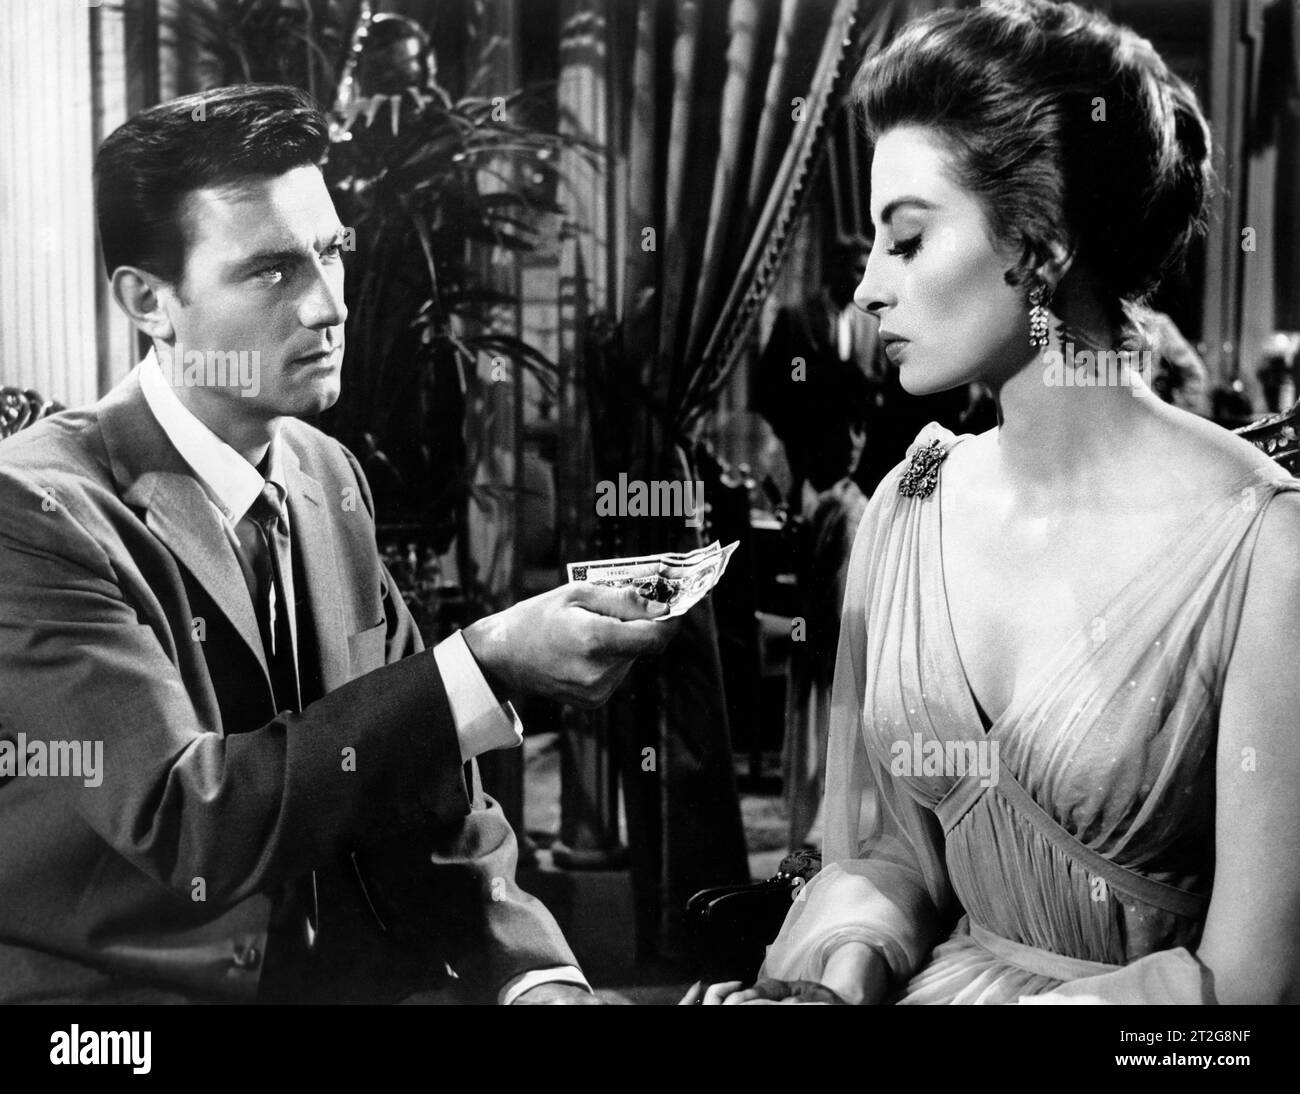 Laurence Harvey, Capucine, on-set of the film, 'Walk on the Wild Side', Columbia Pictures, 1962 Stock Photo